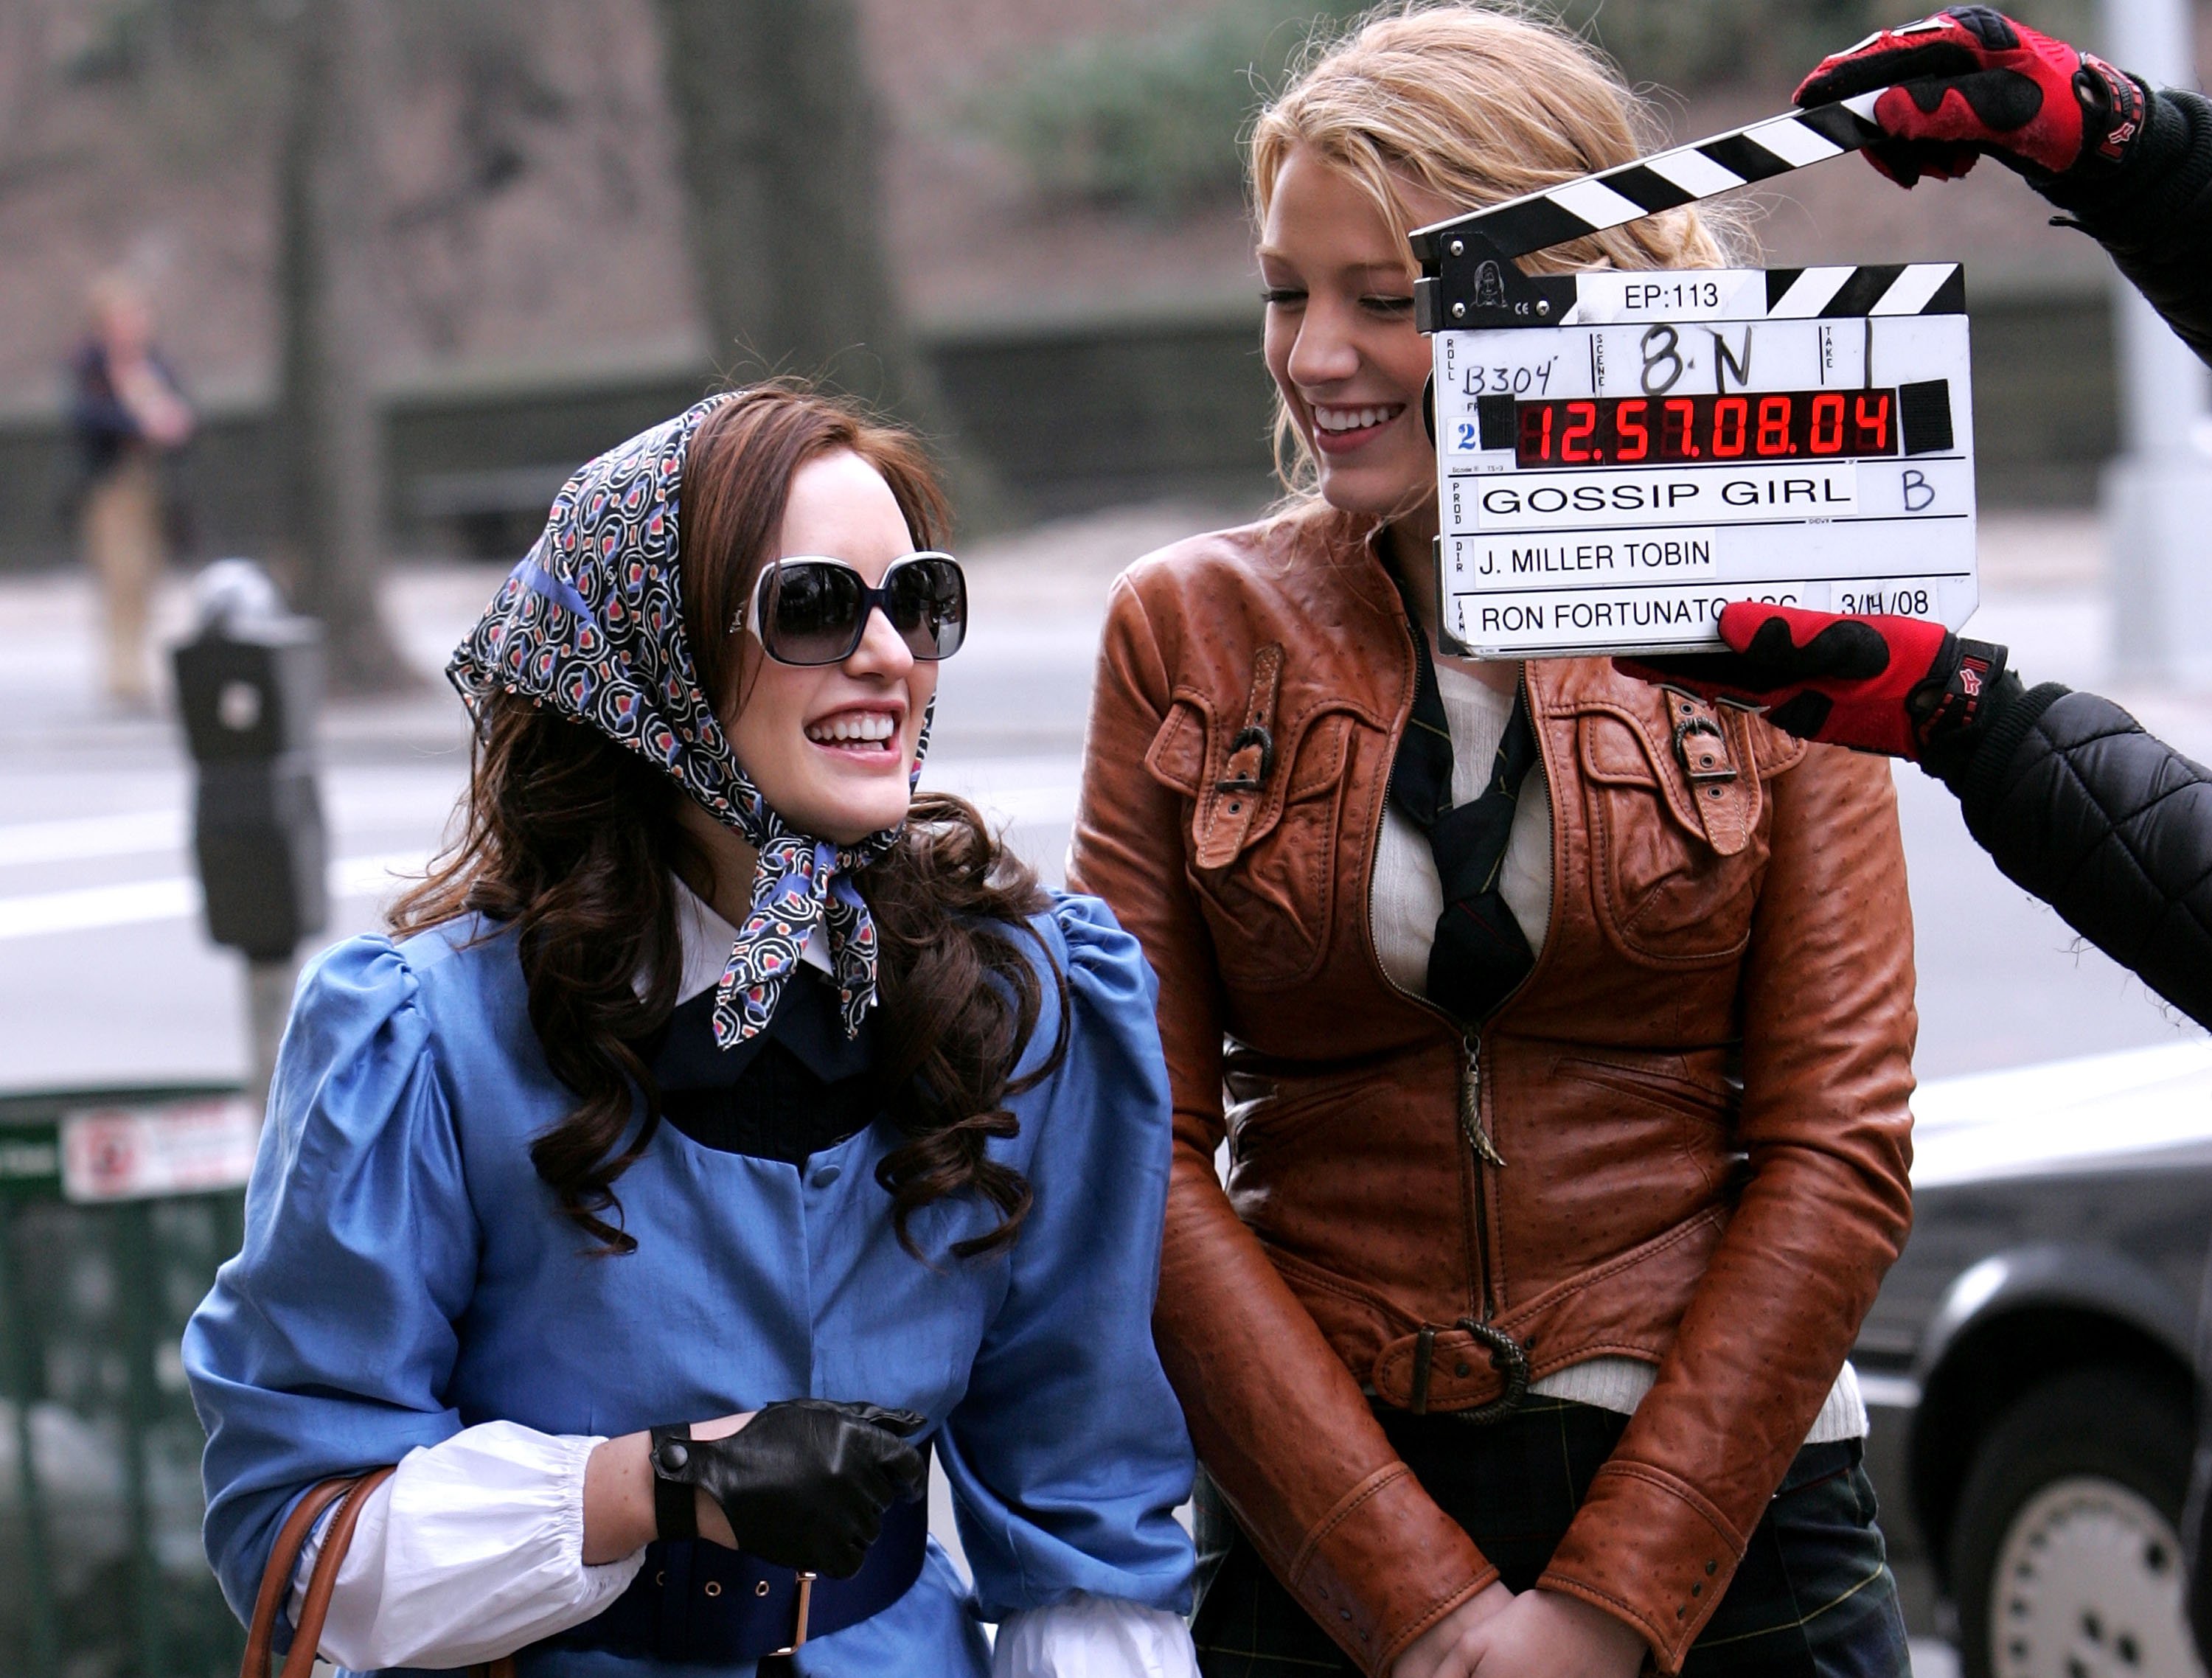 Leighton Meester and Blake Lively get into their 'Gossip Girl' characters in New York City.